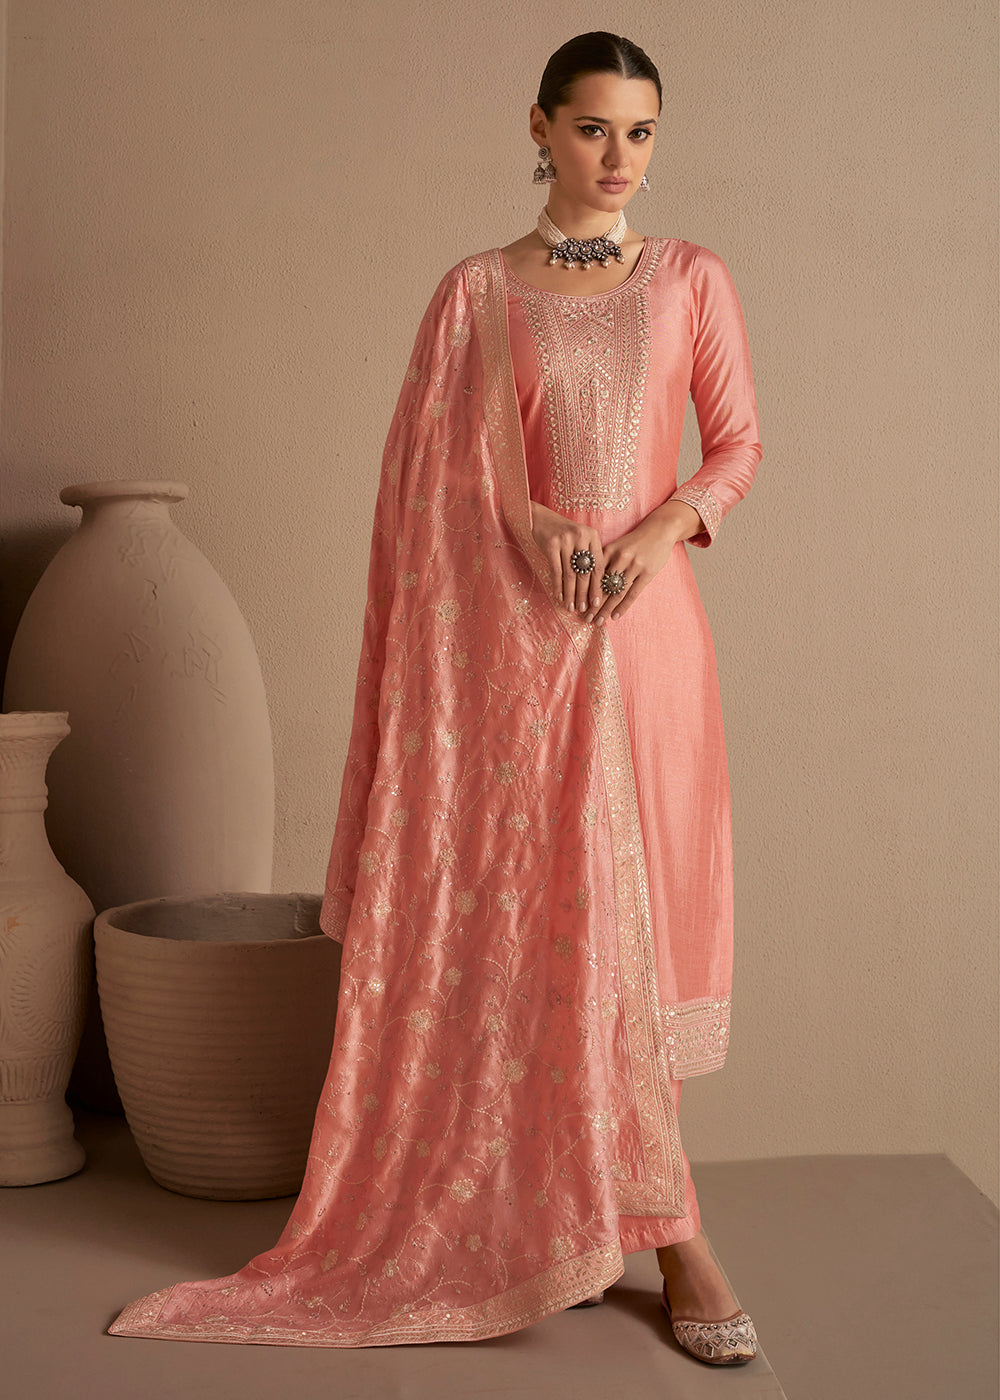 Buy Now Beautiful Soft Peach & Gold Embroidered Premium Silk Salwar Suit Online in USA, UK, Canada, Germany, Australia & Worldwide at Empress Clothing.